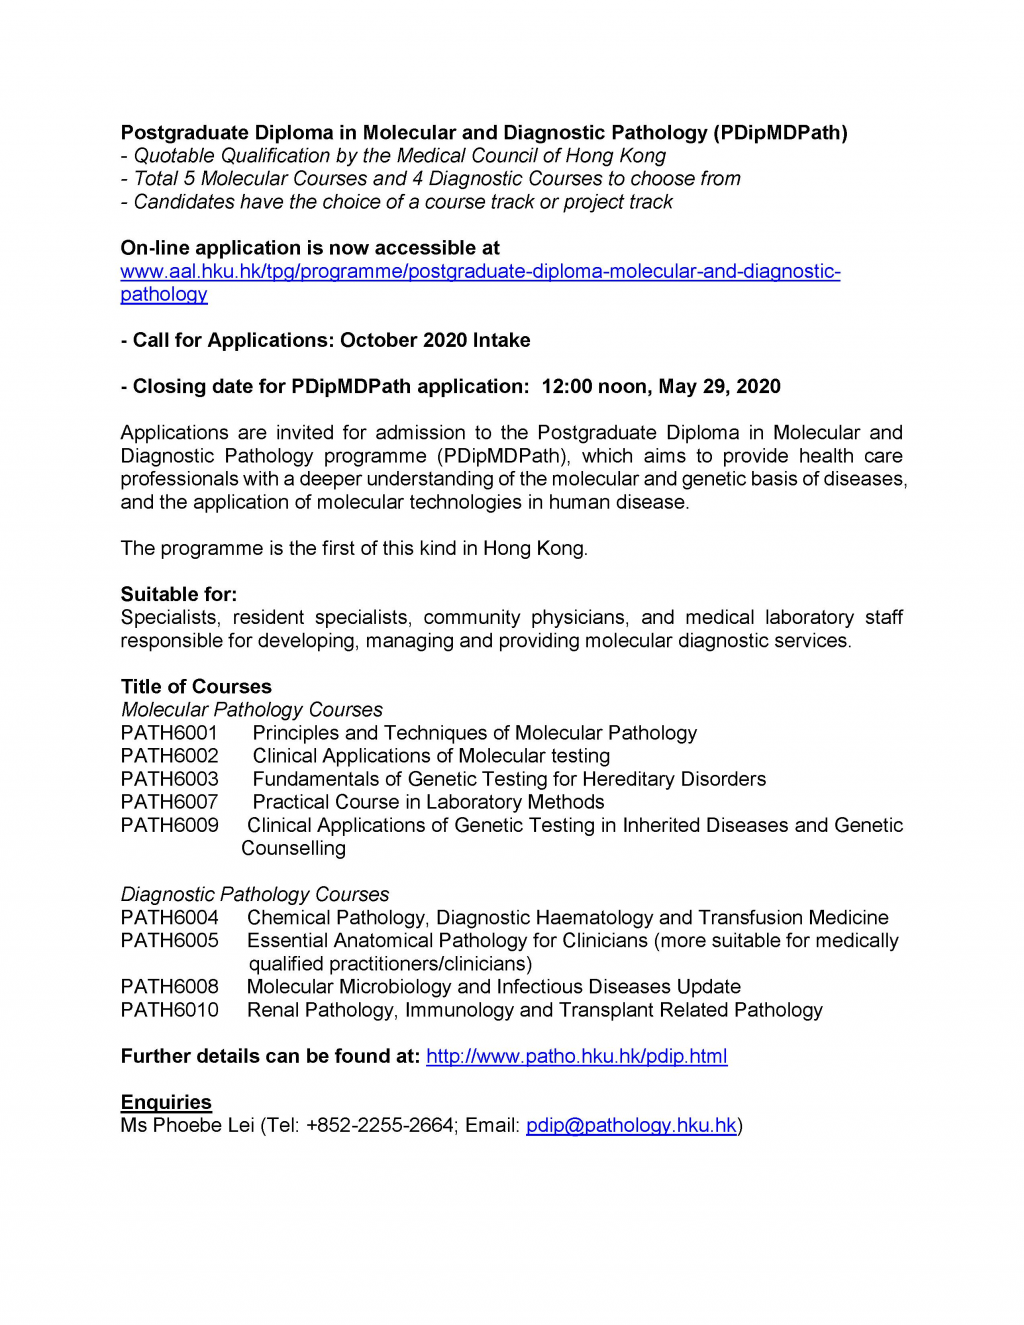 PDipMDPath - Call for Applications ( Oct 2020 Intake)